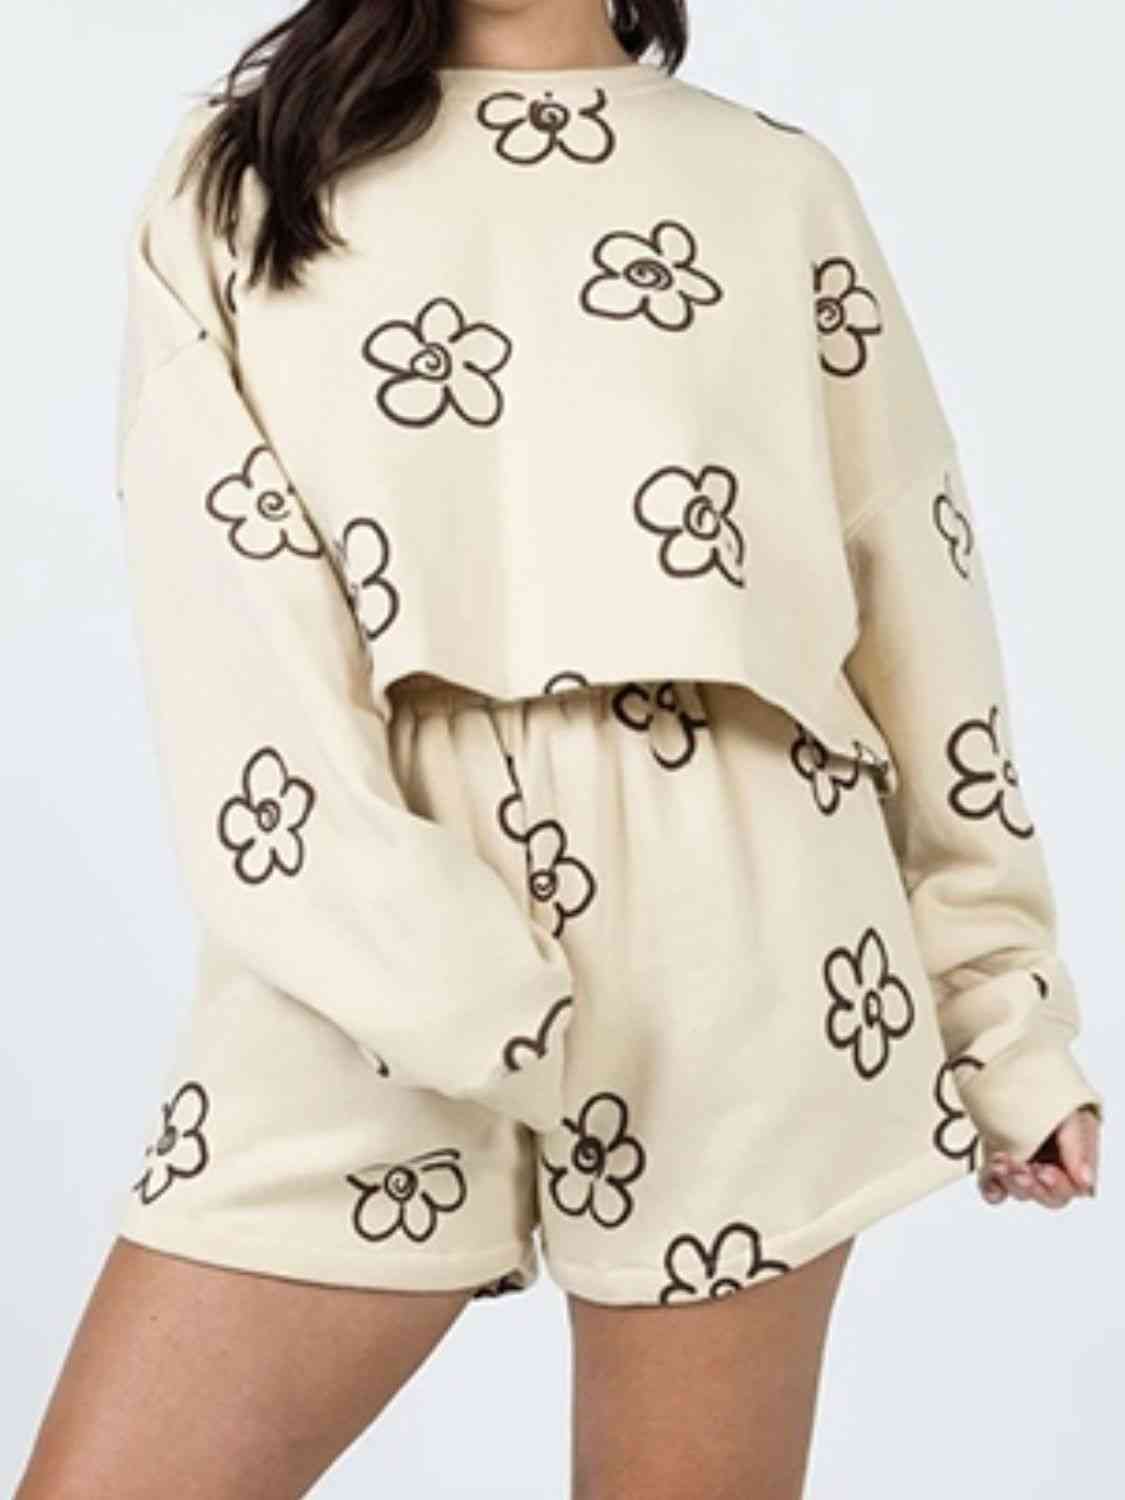 3 Comfy Floral Sweatshirt w/ Shorts Outfit